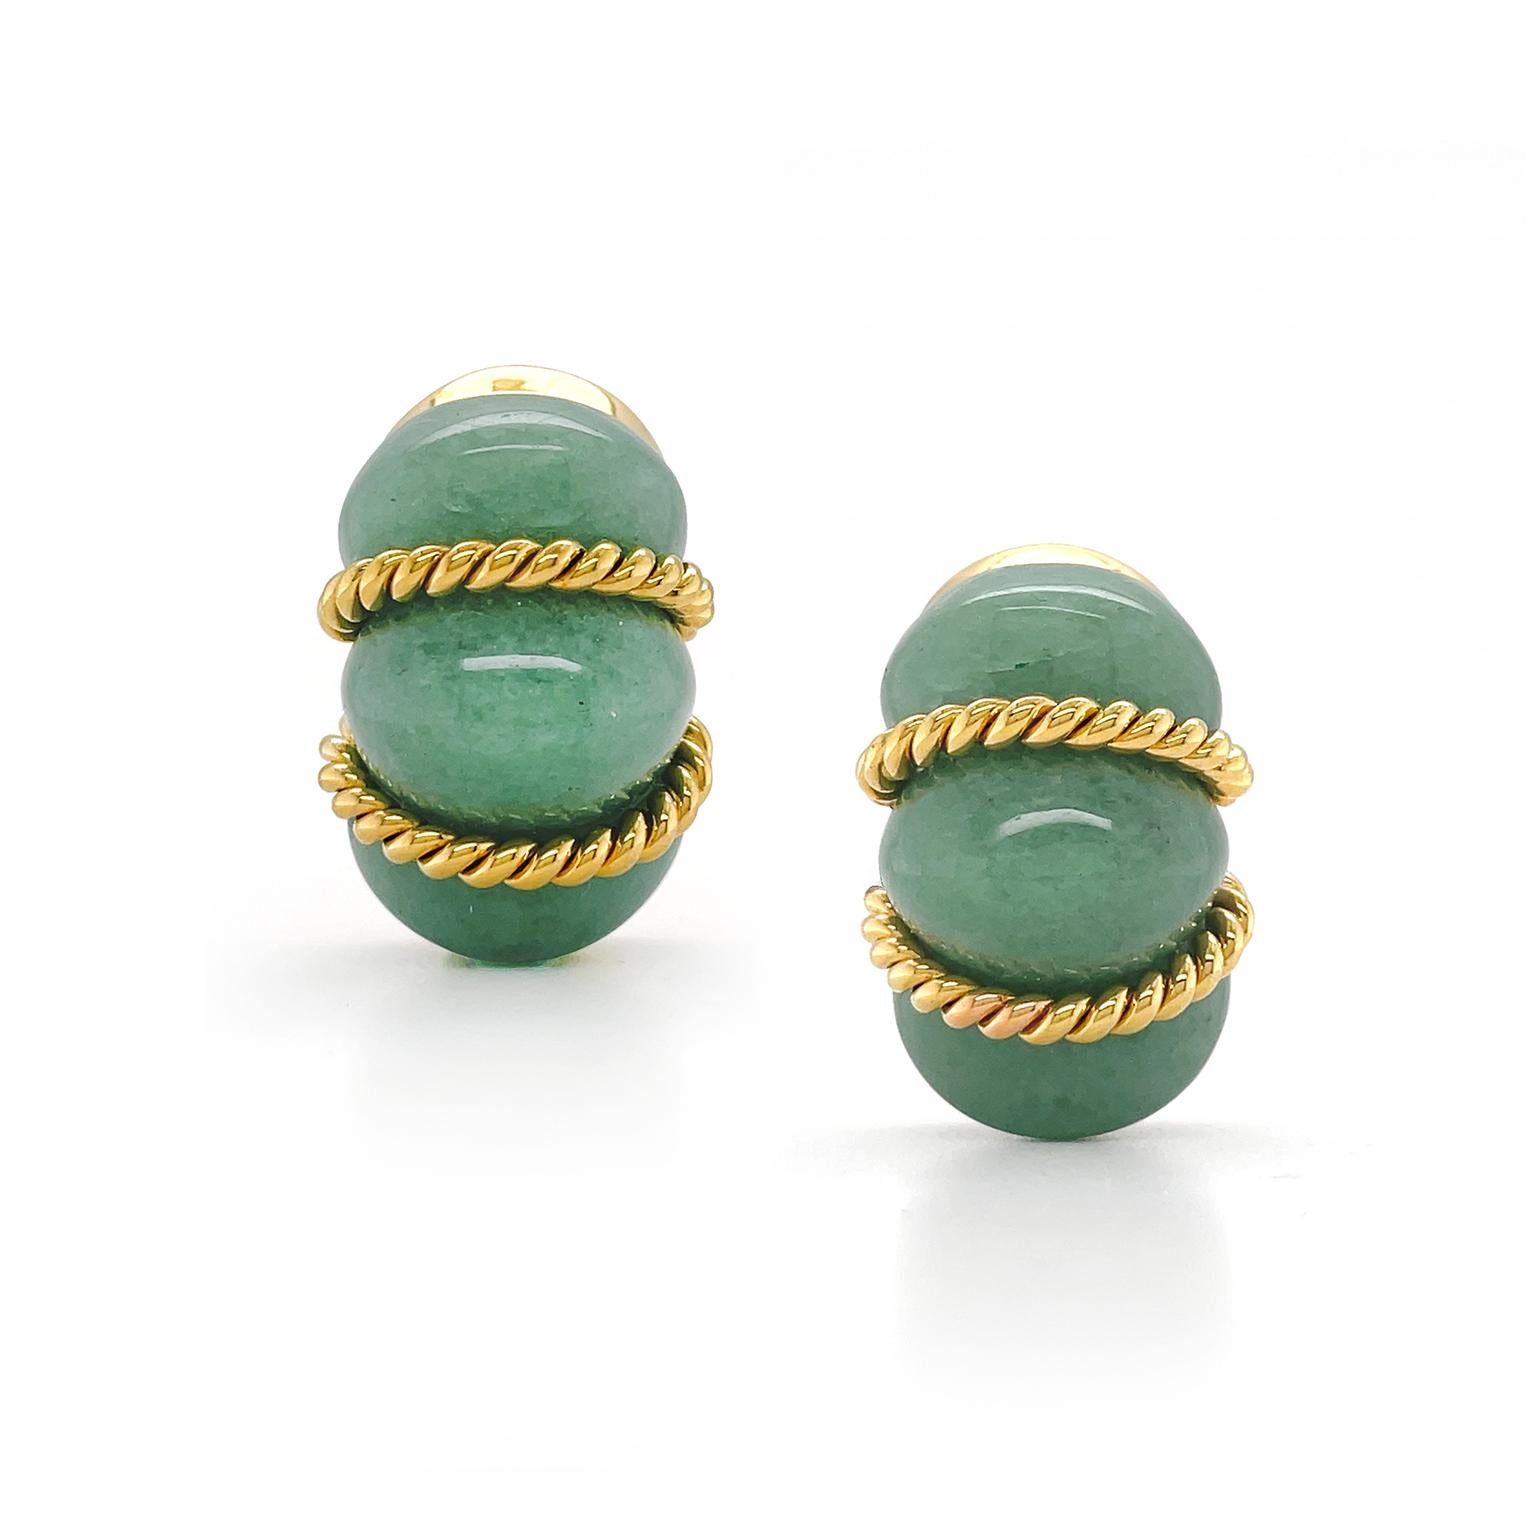 Crystalline quartz of green aventurine reinvents shrimp earrings accented by 18k yellow gold. Green Aventurine is carved into a shrimp motif of three raised structures, totaling two carats, while braids of bright 18k yellow gold rest in the valleys.